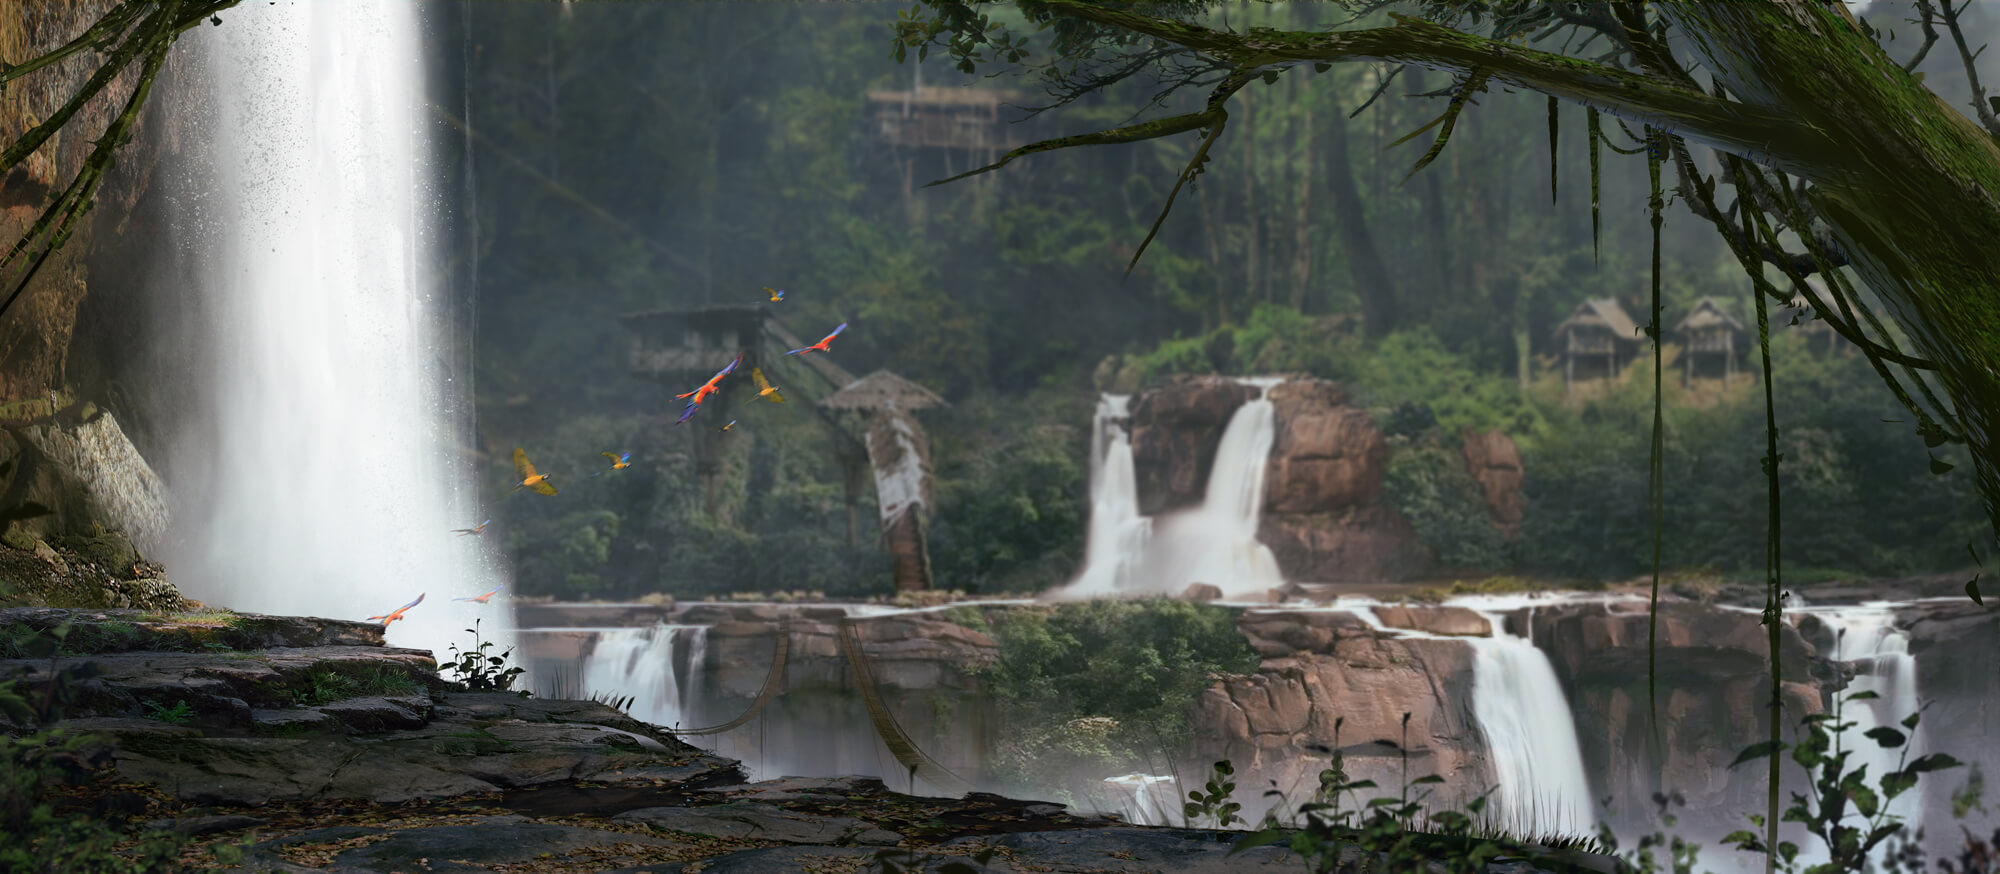 Eloden background. Lush forest with waterfall. Rope bridges span a canyon and primitive structures hide amoung the trees.